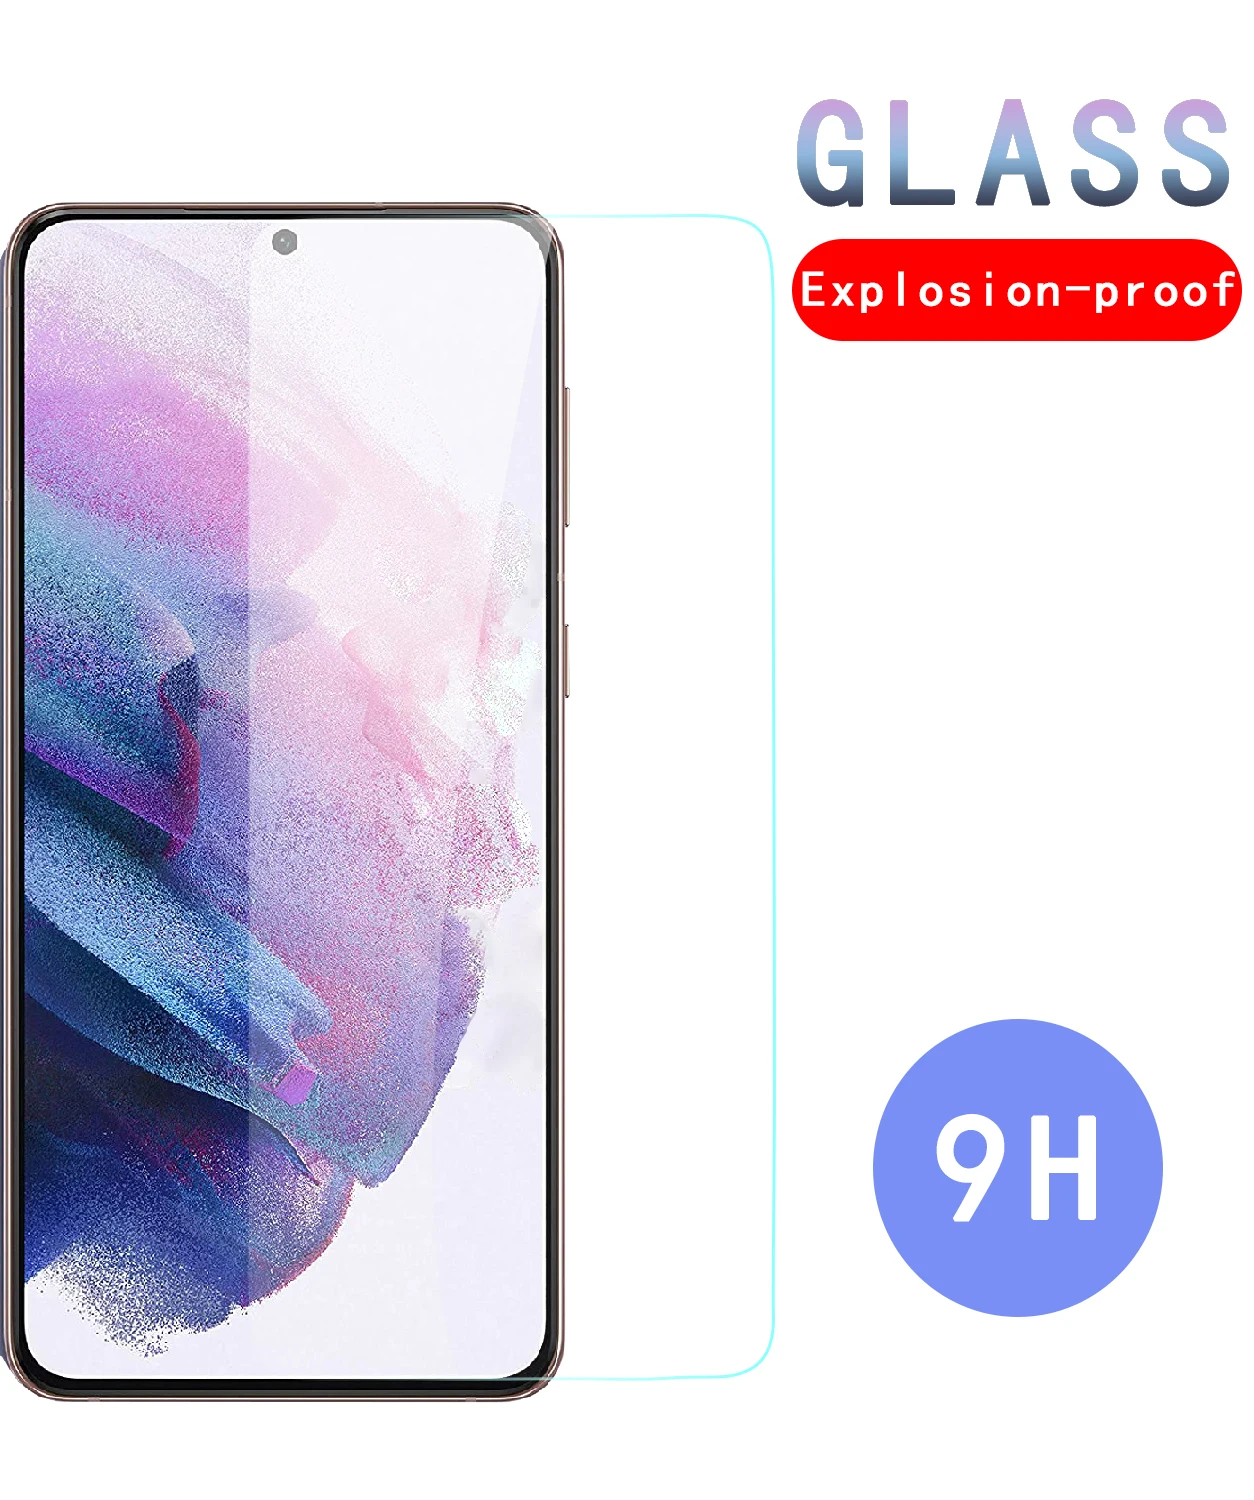 9H Protective Glass For Samsung Galaxy A71 A51 A41 A31 A21S A11 A01 Screen Protector M01 M11 M21 M31 M51 A30 A50 Safety Glass